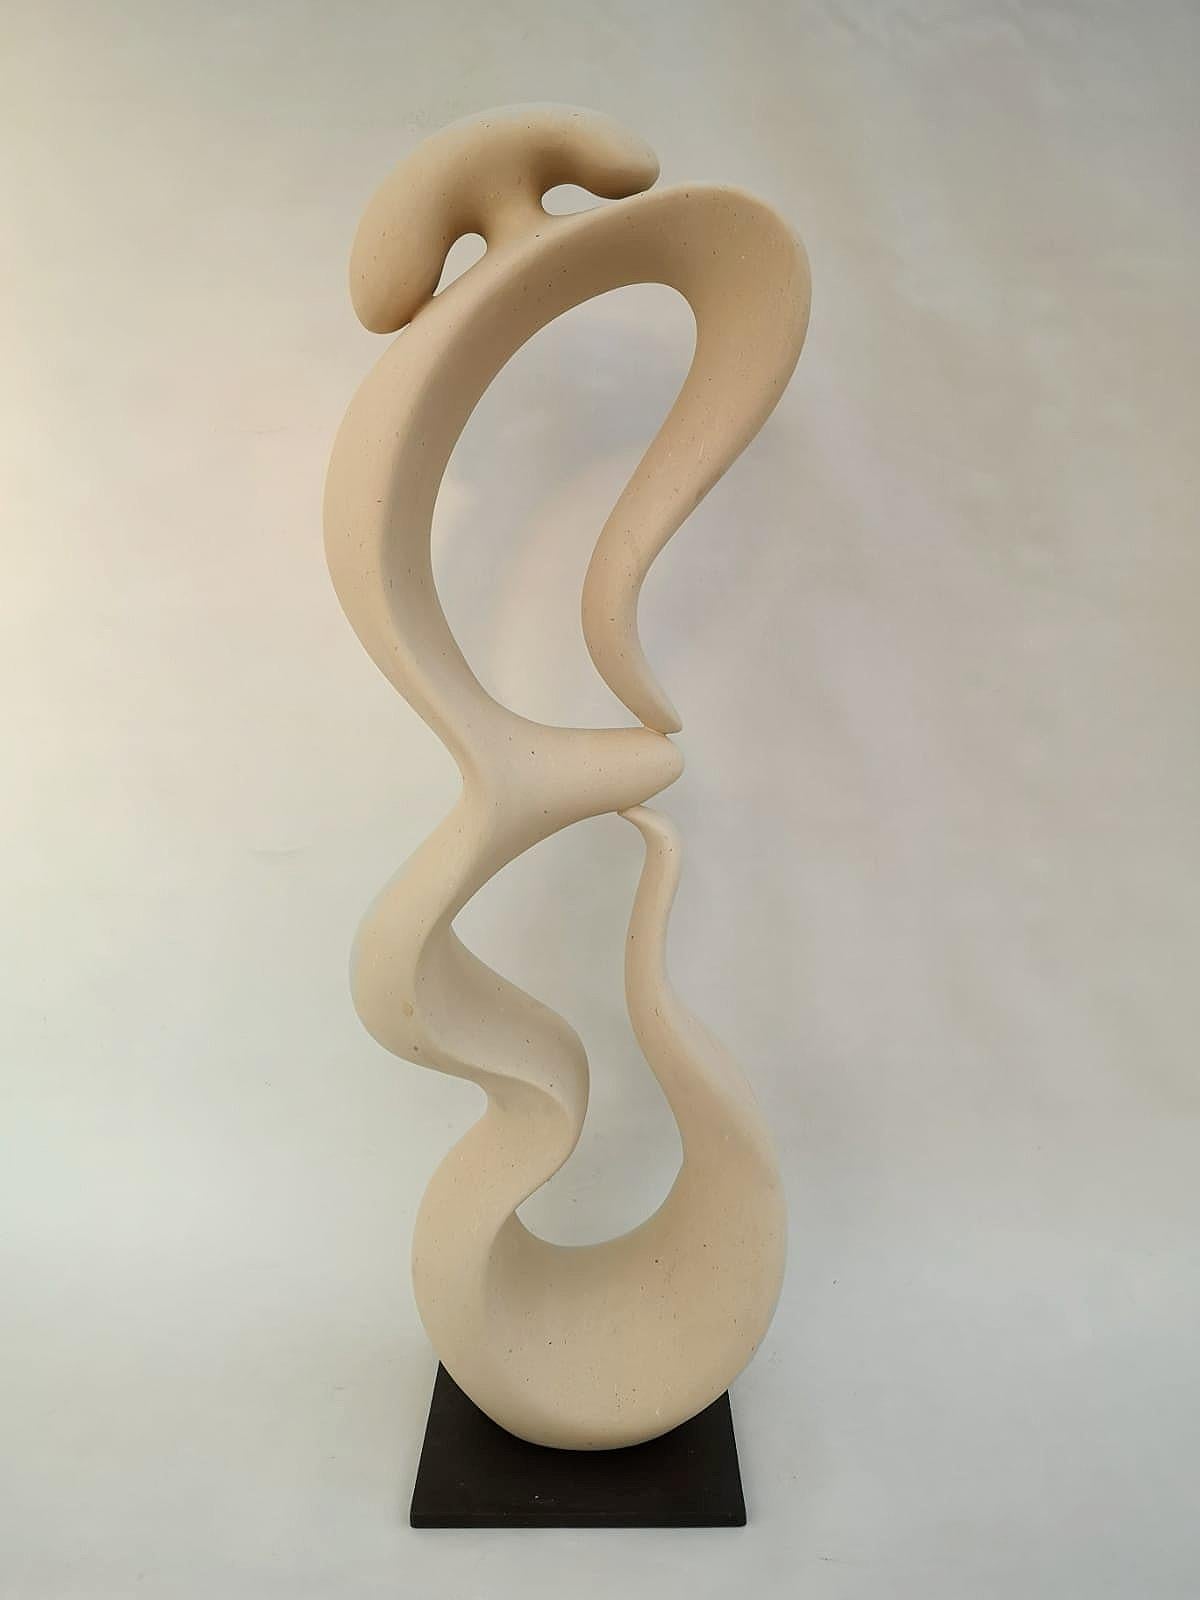 21st Century abstract sculpture BLANDAMENTA by Renzo Buttazzo from Italy. Measure: heigh 80 cm.

Sculpture in Lecce Stone
Delivered with a certificate of authenticity.

Since 1886 Renzo Buttazzo work with Pietra Leccese (limestone from Lecce), and